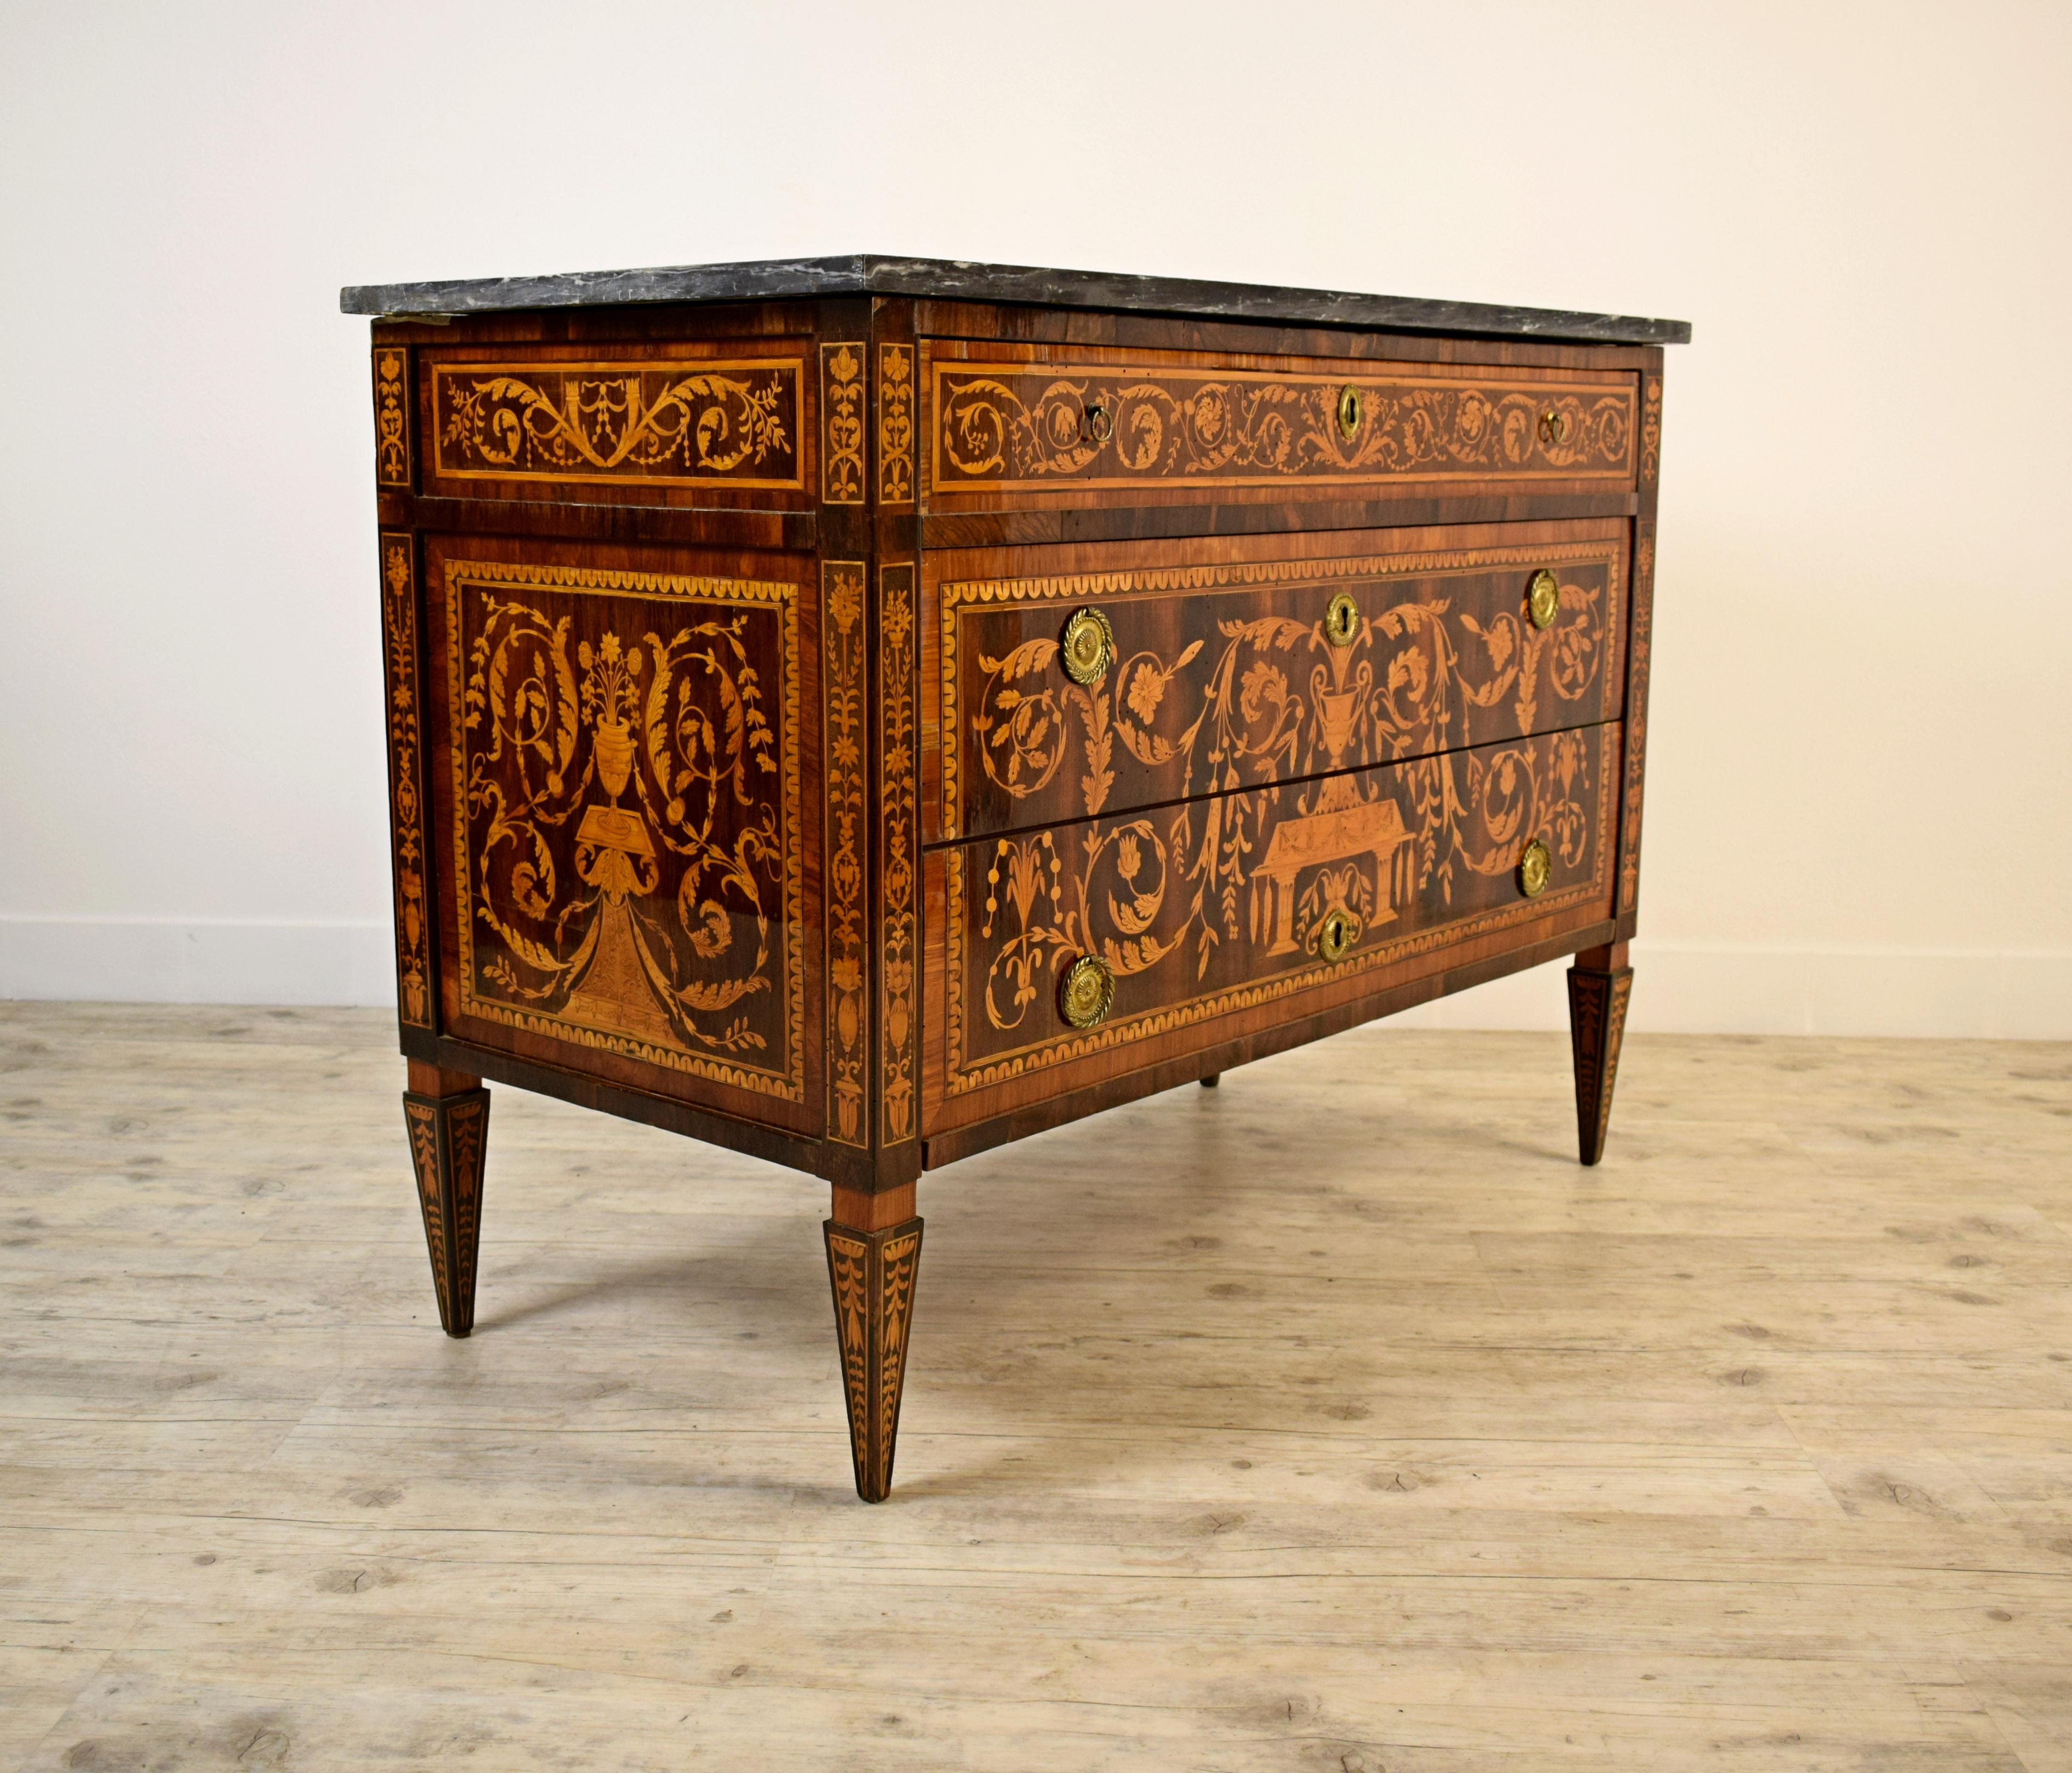 18th century, Italian neoclassical inlaid wood chest of drawers

This refined neoclassical chest of drawers was done around the end of the 18th century in Genoa (Italy). The cabinet has two large drawers and a smaller upper pull-bar. Between the